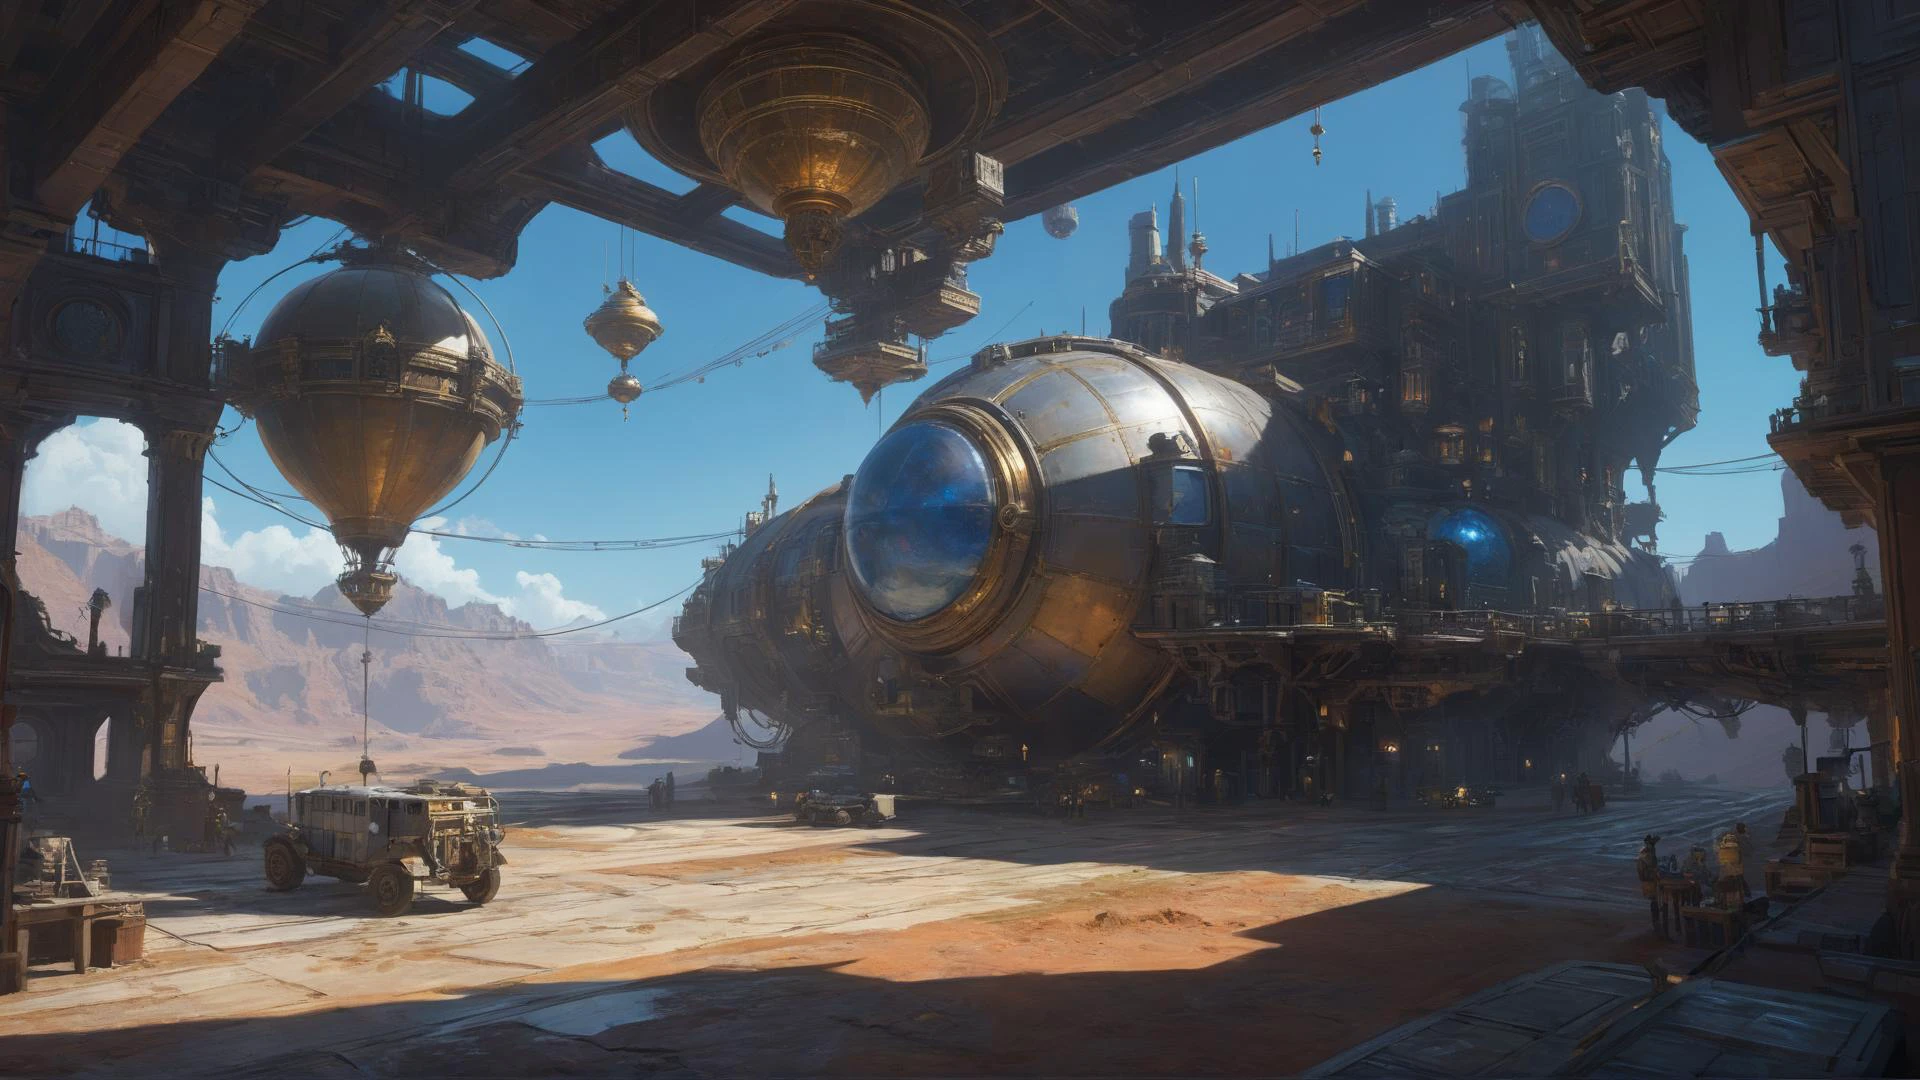 SK_DIGITALART, painting of a steampunk planet outside of time, an exotic distant world, by Ian McQue, 
highly impressive & realistic, Hyper-detailed, Insane Details, Intricate Details, Cinematics, Editorial Art, Tilt Blur, Super-Resolution, Megapixels, Unreal Engine 5, Studio Lighting, Volumetric, Optical, Diffusion Glowing, Shadows, Proportions, Rough, Shimmery, Ray Tracing Reflections, Glossy, Lumen Reflections, Screen Space Reflections, Diffraction Rating, Chromatic Aberration, GB Shift, Ray Tracing, Ray Tracing Ambient Occlusion Anti-Ali asing, Post-Processing, Post-Production, Cel Shading, Tone Mapping, Incredibly Detailed and Intricate, Hypermaximalist, Sleek, Hyper Realistic, Super Detailed, Dynamic Pose, Hyperrealism, HDI, 8k  dramatic lighting, dark colors, wide angle view, panorama view, dominant colors Cortana Blue and Rich Blue, 
